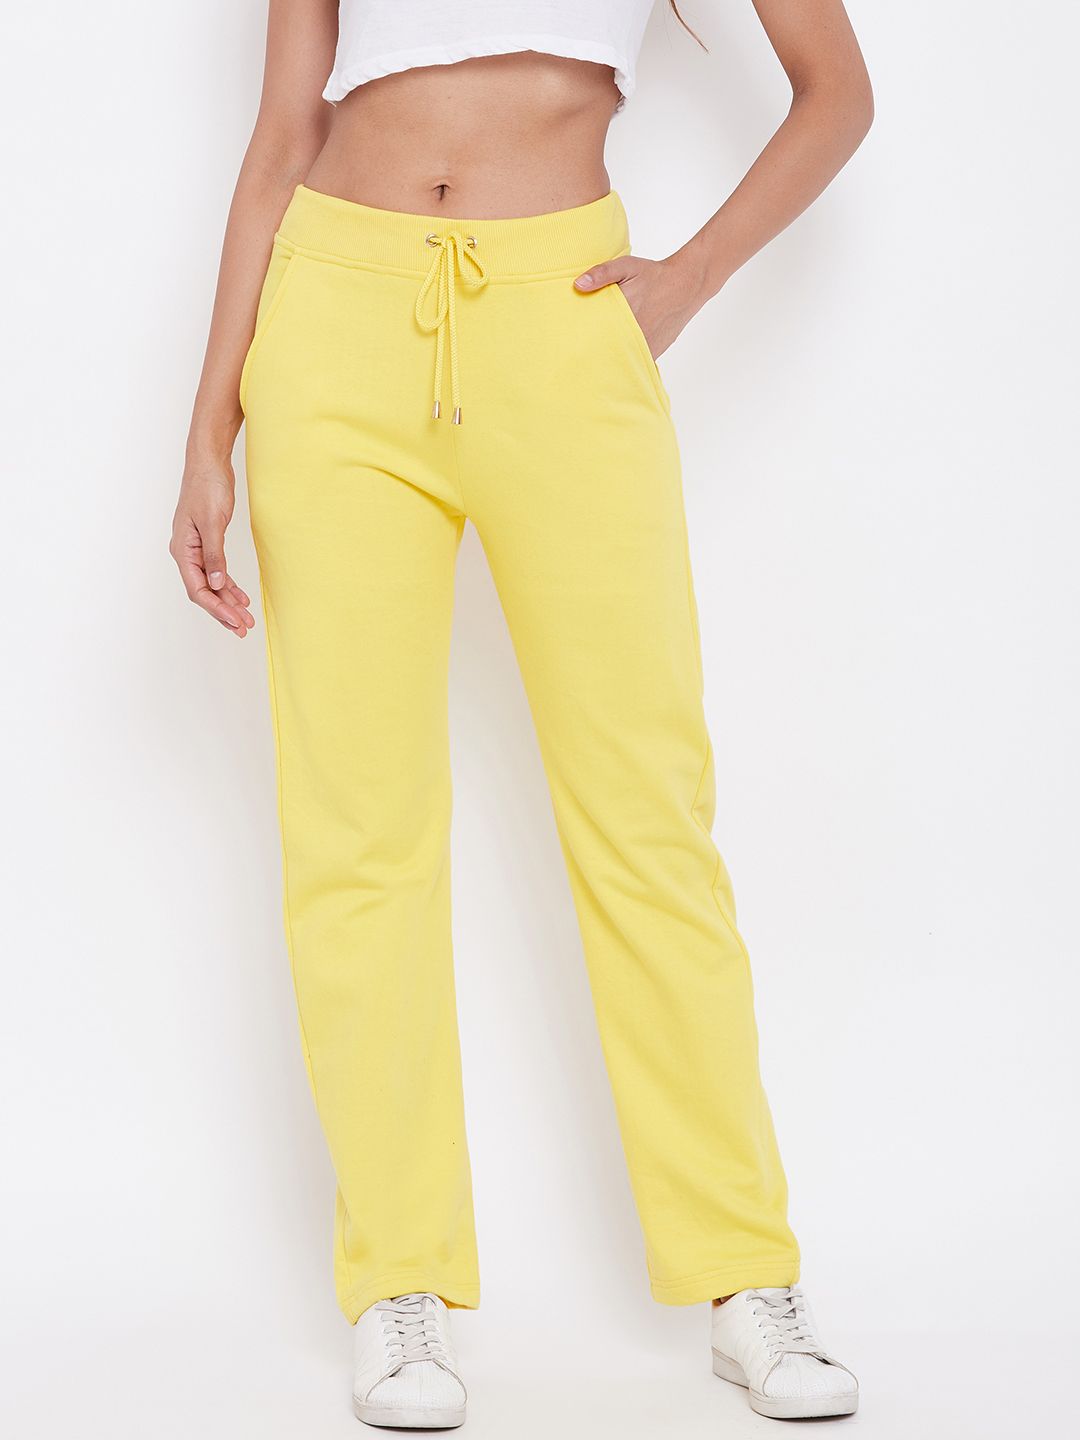 Alsace Lorraine Paris Women Yellow Solid Track Pants Price in India